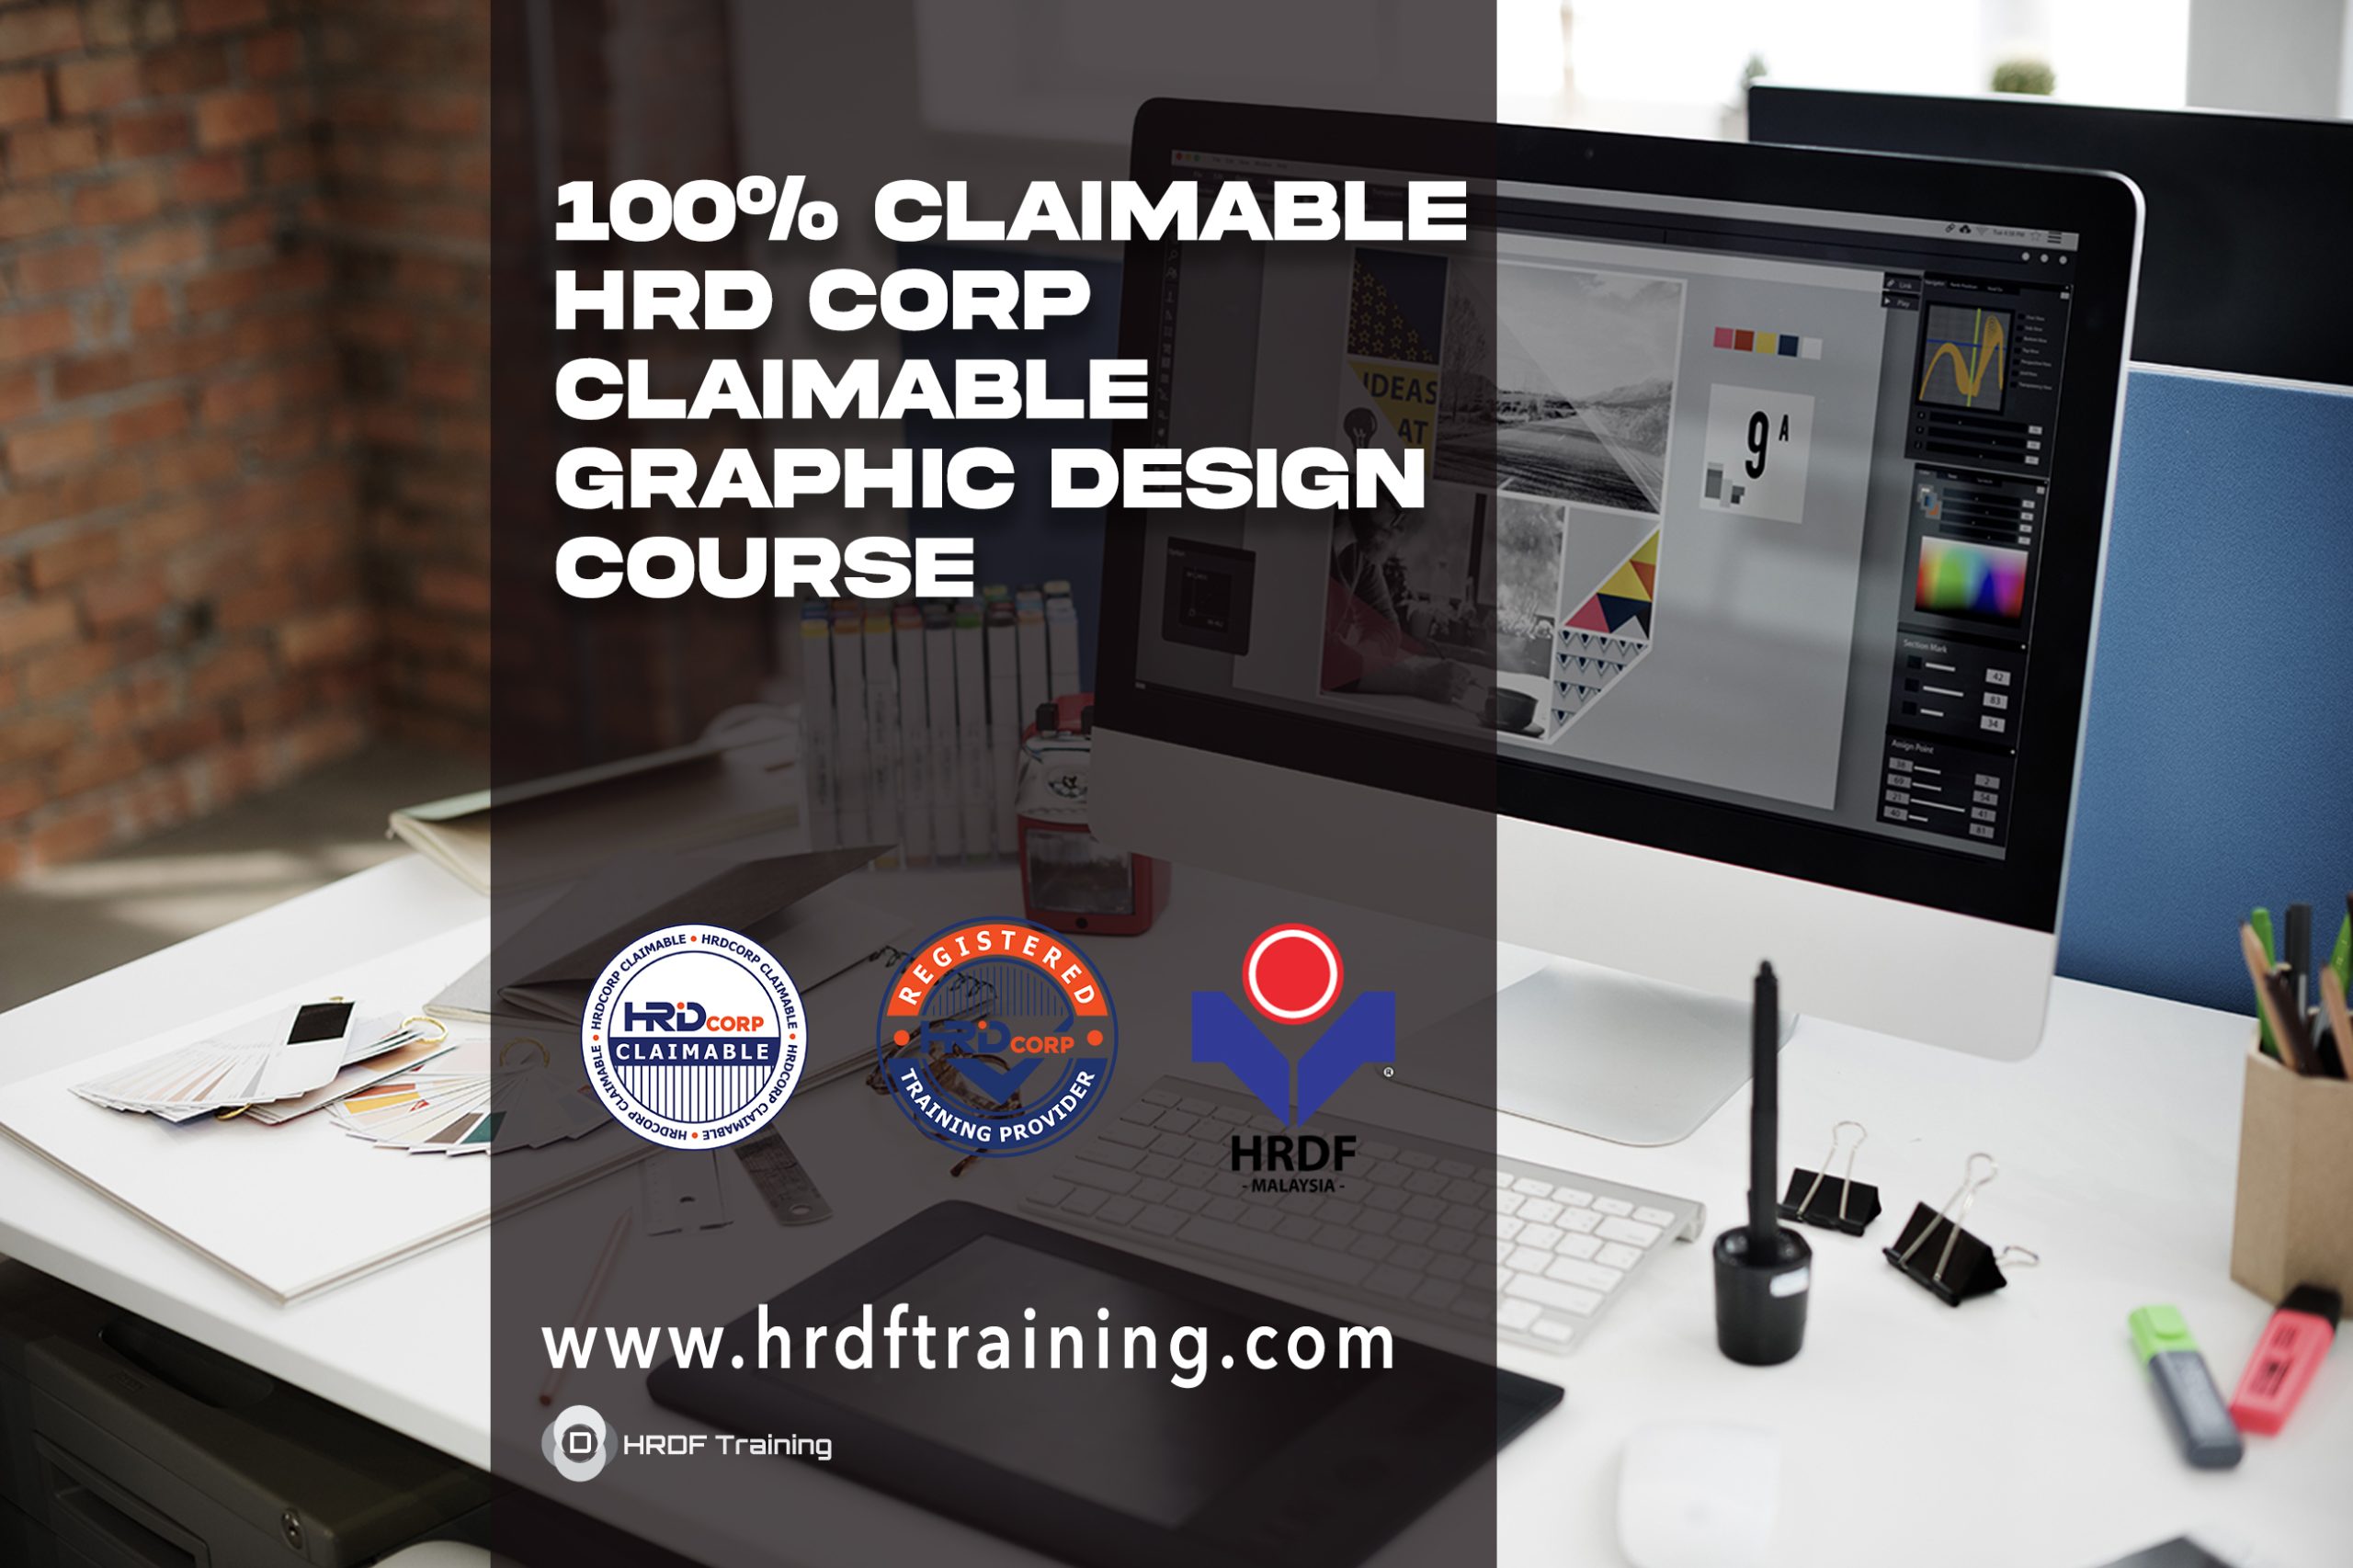 HRDF HRD Corp Claimable Graphic Design Training Course Malaysia - April 2023